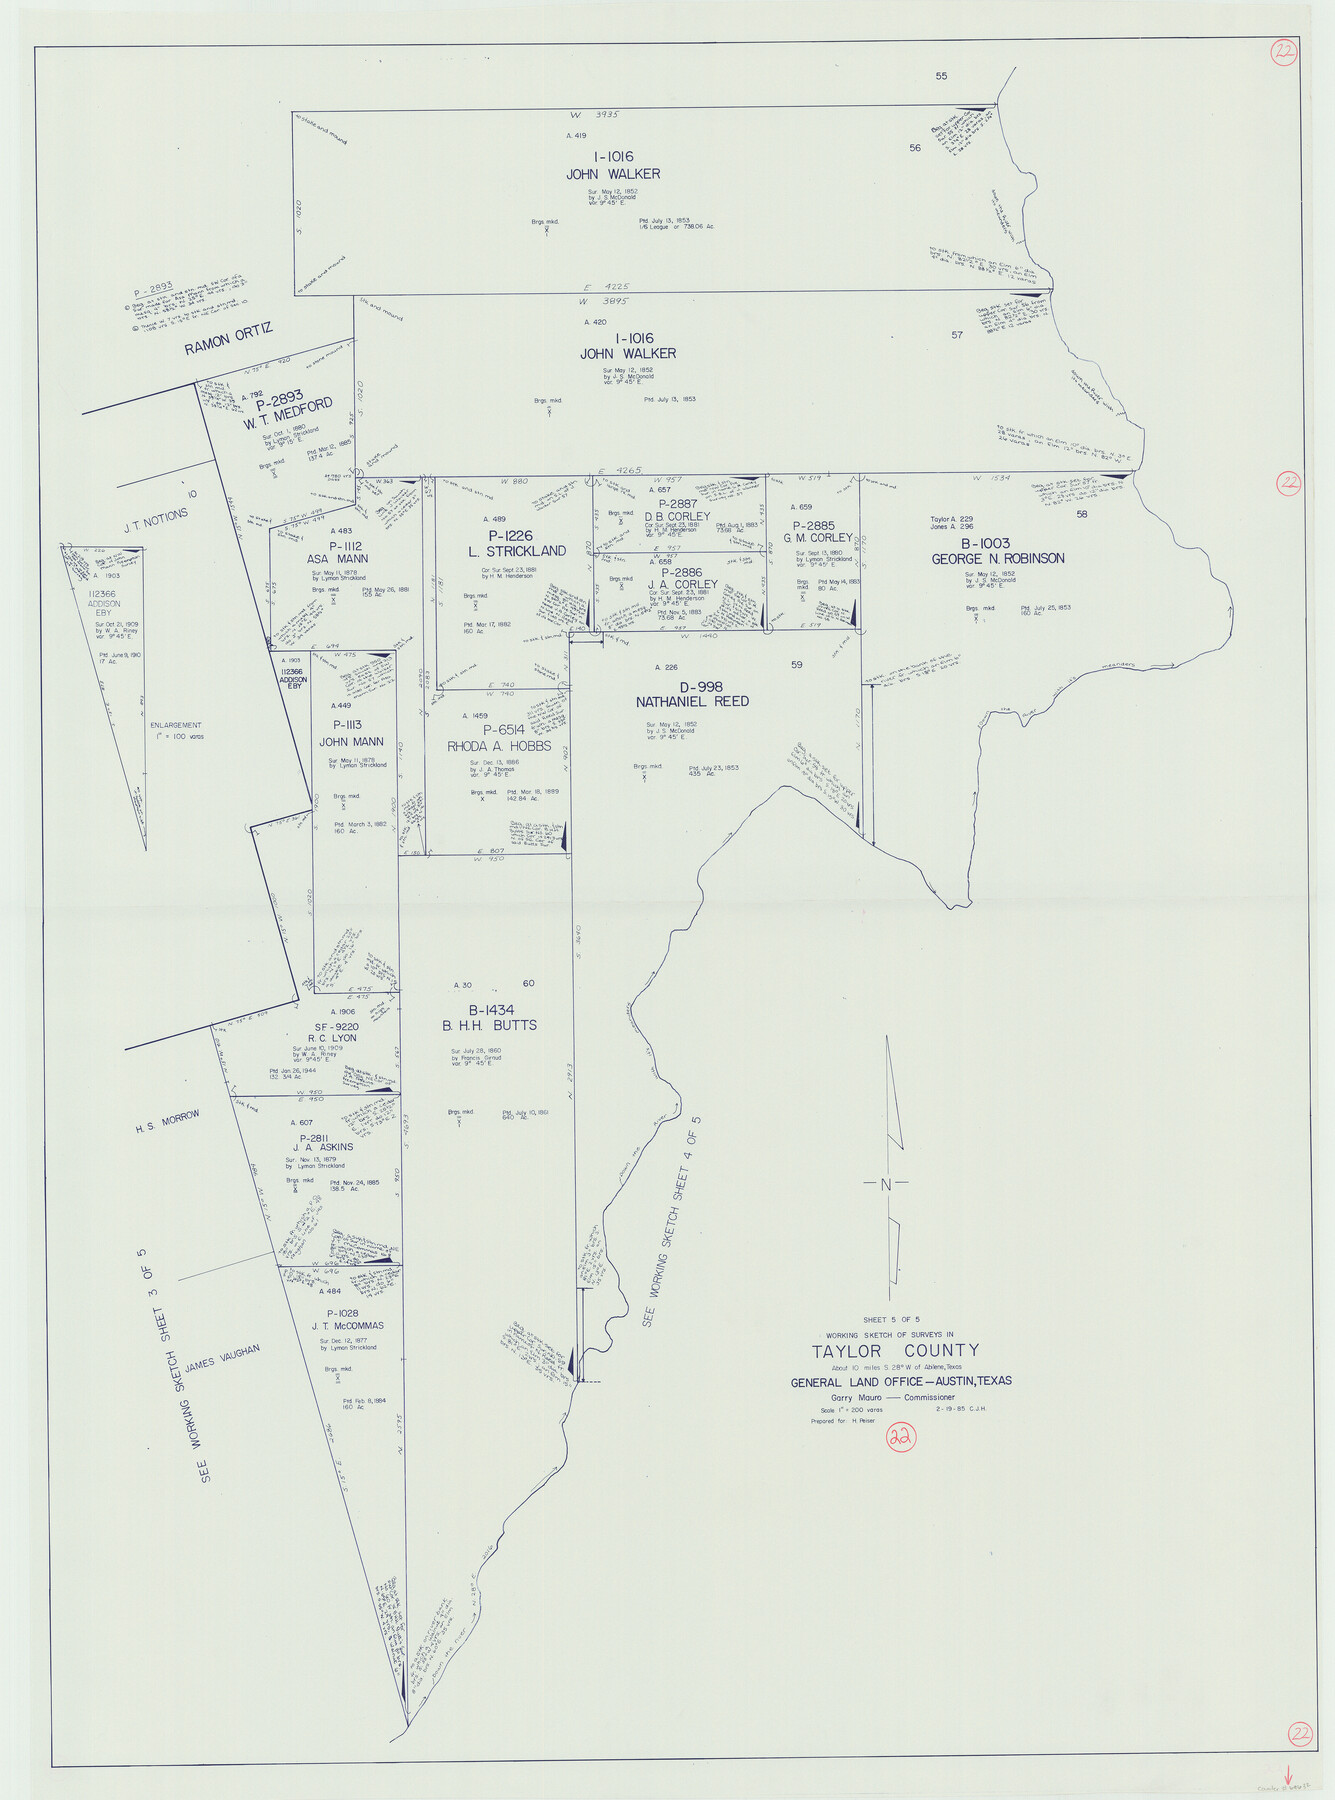 69632, Taylor County Working Sketch 22, General Map Collection